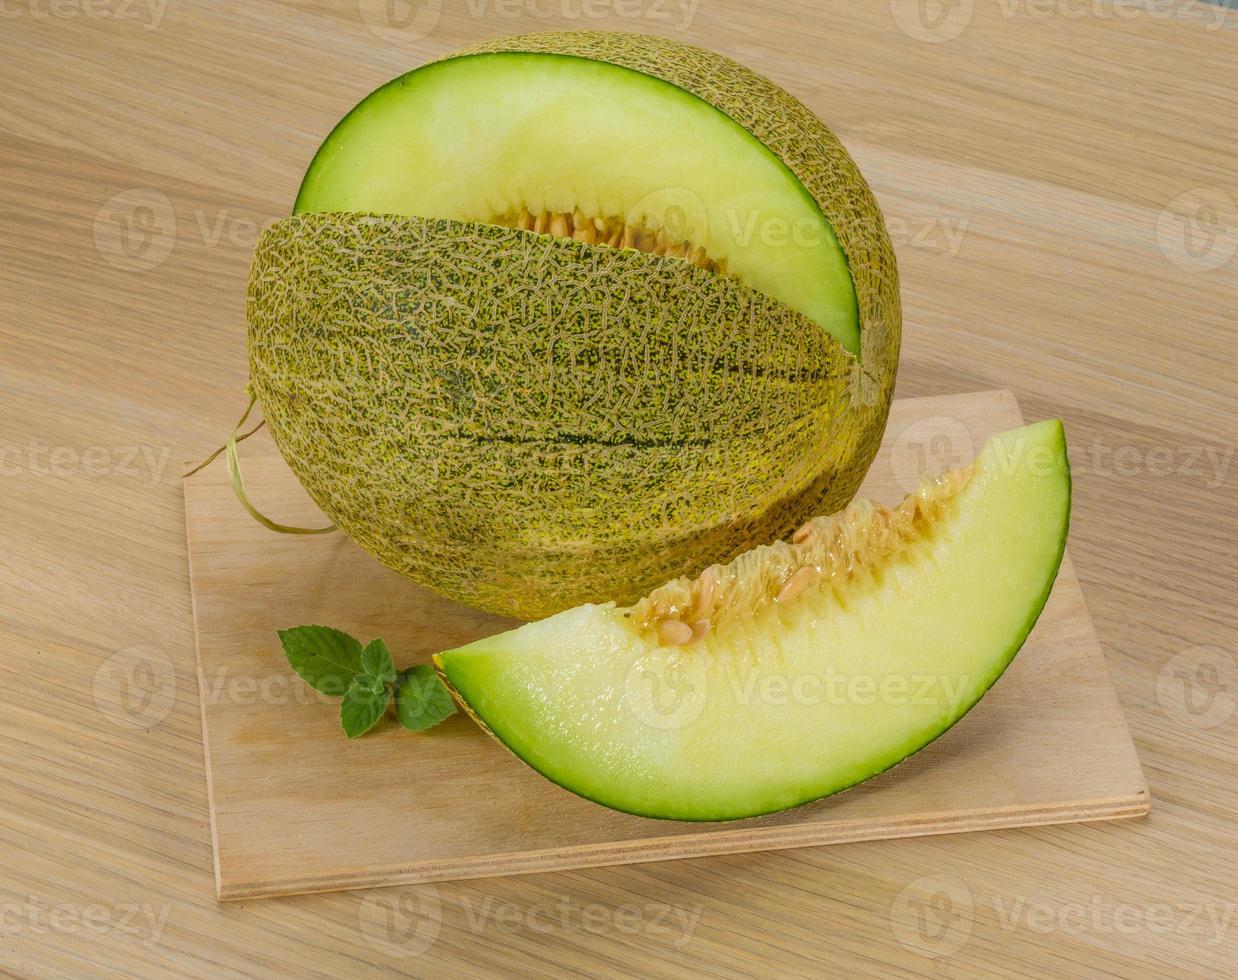 Melon on wooden background photo